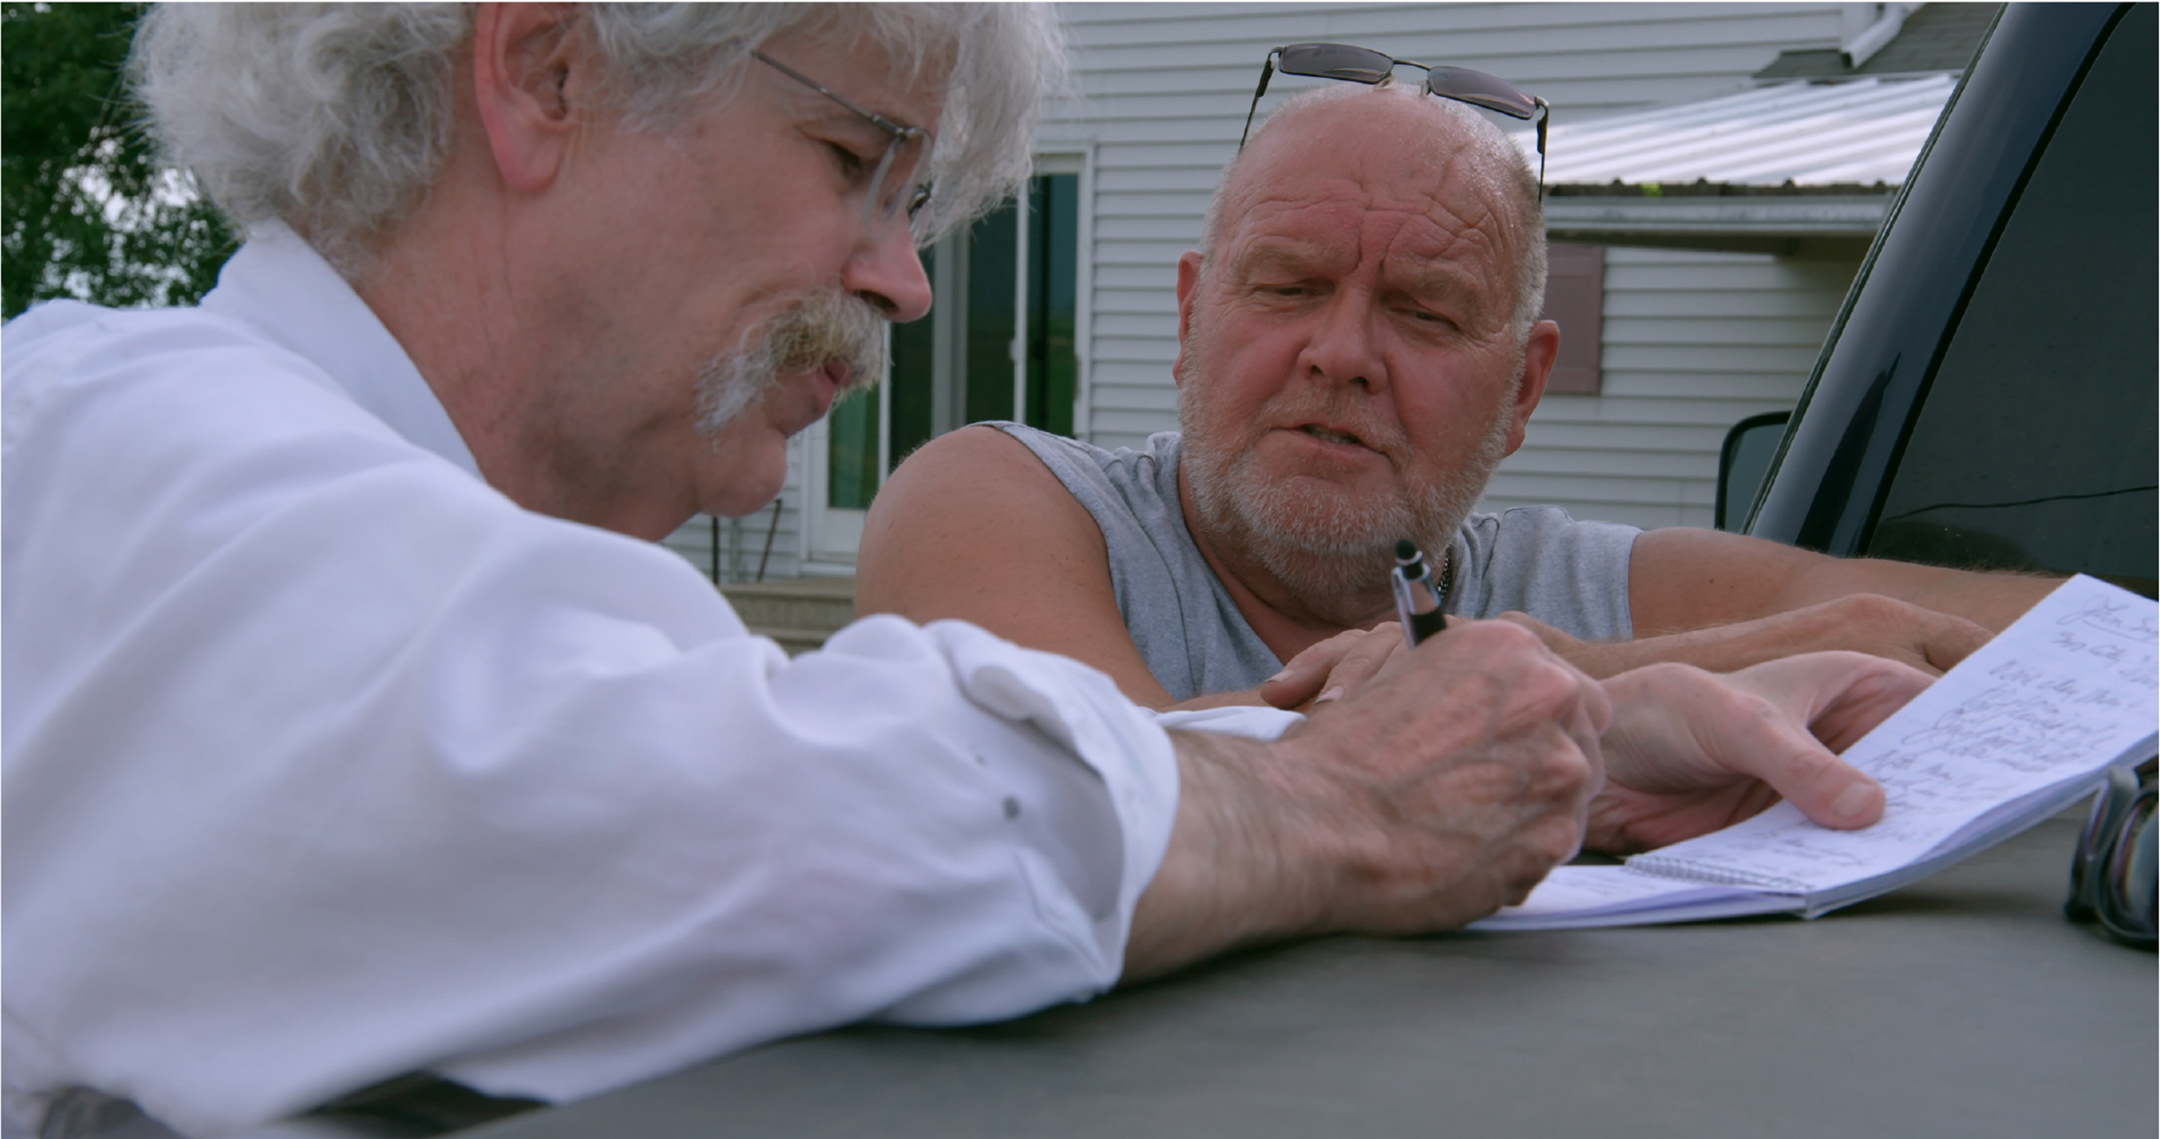 Man with mustache and glasses writes in a notebook as he talks to another man in a sleeveless t-shirt, both standing next to a pickup truck